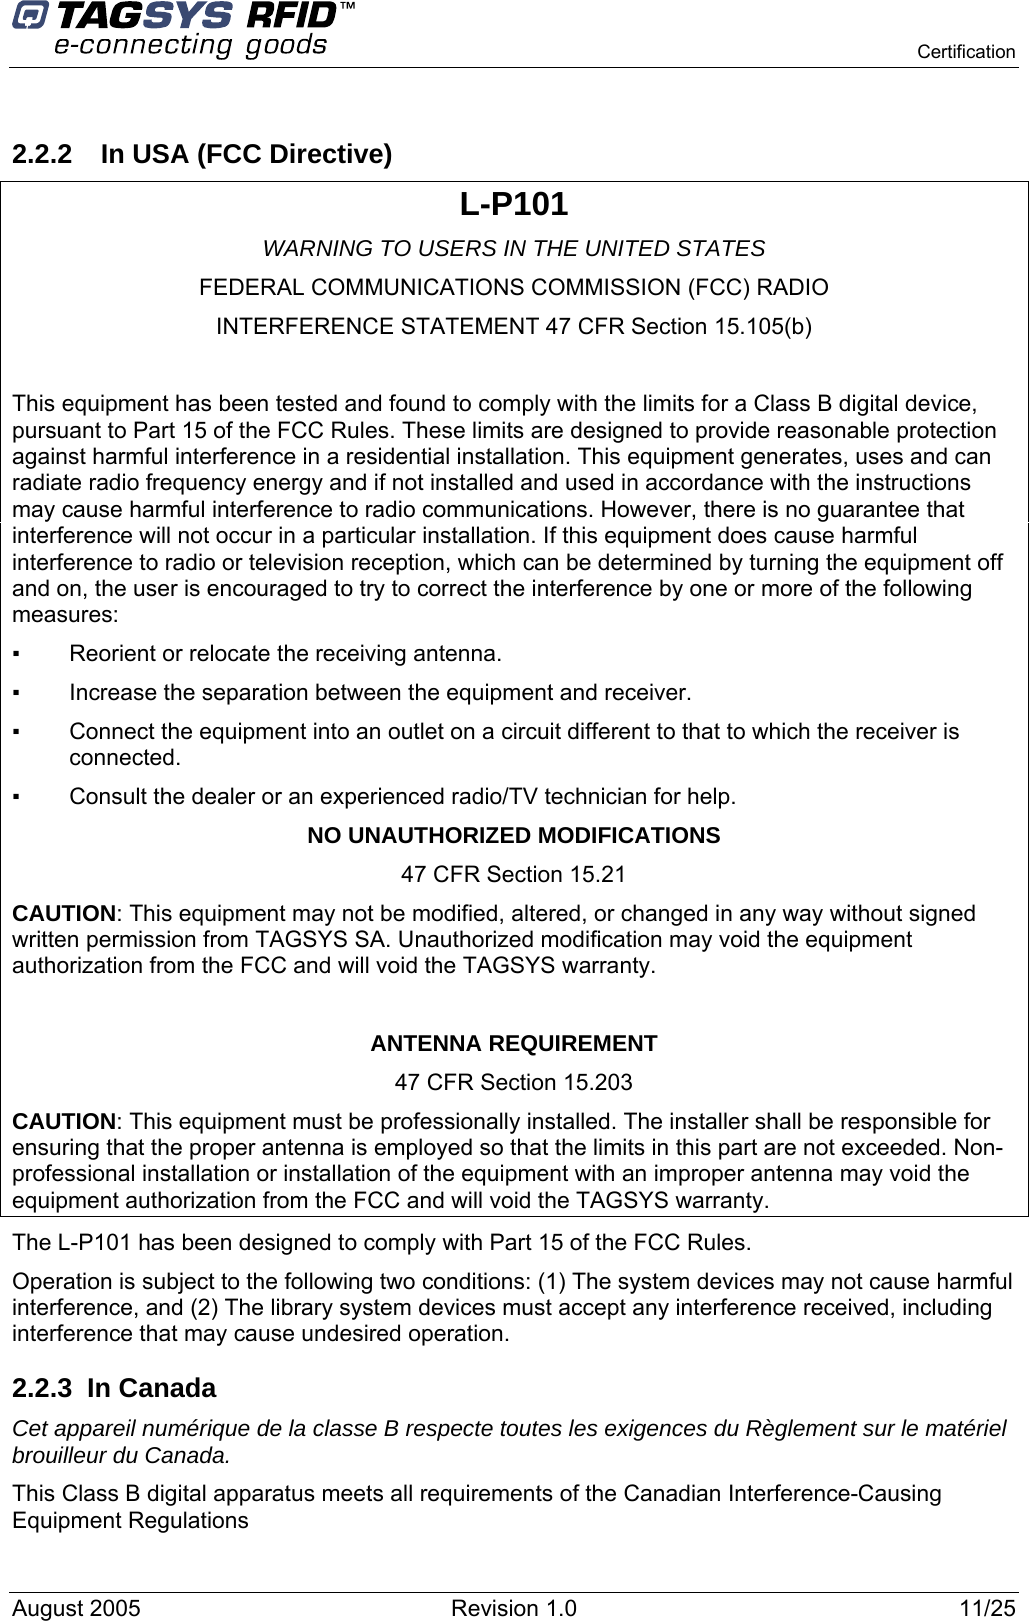    Certification    2.2.2  In USA (FCC Directive) L-P101 WARNING TO USERS IN THE UNITED STATES FEDERAL COMMUNICATIONS COMMISSION (FCC) RADIO INTERFERENCE STATEMENT 47 CFR Section 15.105(b)  This equipment has been tested and found to comply with the limits for a Class B digital device, pursuant to Part 15 of the FCC Rules. These limits are designed to provide reasonable protection against harmful interference in a residential installation. This equipment generates, uses and can radiate radio frequency energy and if not installed and used in accordance with the instructions may cause harmful interference to radio communications. However, there is no guarantee that interference will not occur in a particular installation. If this equipment does cause harmful interference to radio or television reception, which can be determined by turning the equipment off and on, the user is encouraged to try to correct the interference by one or more of the following measures:  ▪   Reorient or relocate the receiving antenna. ▪   Increase the separation between the equipment and receiver. ▪   Connect the equipment into an outlet on a circuit different to that to which the receiver is connected. ▪   Consult the dealer or an experienced radio/TV technician for help. NO UNAUTHORIZED MODIFICATIONS 47 CFR Section 15.21 CAUTION: This equipment may not be modified, altered, or changed in any way without signed written permission from TAGSYS SA. Unauthorized modification may void the equipment authorization from the FCC and will void the TAGSYS warranty.  ANTENNA REQUIREMENT 47 CFR Section 15.203 CAUTION: This equipment must be professionally installed. The installer shall be responsible for ensuring that the proper antenna is employed so that the limits in this part are not exceeded. Non-professional installation or installation of the equipment with an improper antenna may void the equipment authorization from the FCC and will void the TAGSYS warranty. The L-P101 has been designed to comply with Part 15 of the FCC Rules. Operation is subject to the following two conditions: (1) The system devices may not cause harmful interference, and (2) The library system devices must accept any interference received, including interference that may cause undesired operation. 2.2.3 In Canada Cet appareil numérique de la classe B respecte toutes les exigences du Règlement sur le matériel brouilleur du Canada. This Class B digital apparatus meets all requirements of the Canadian Interference-Causing Equipment Regulations August 2005  Revision 1.0  11/25   